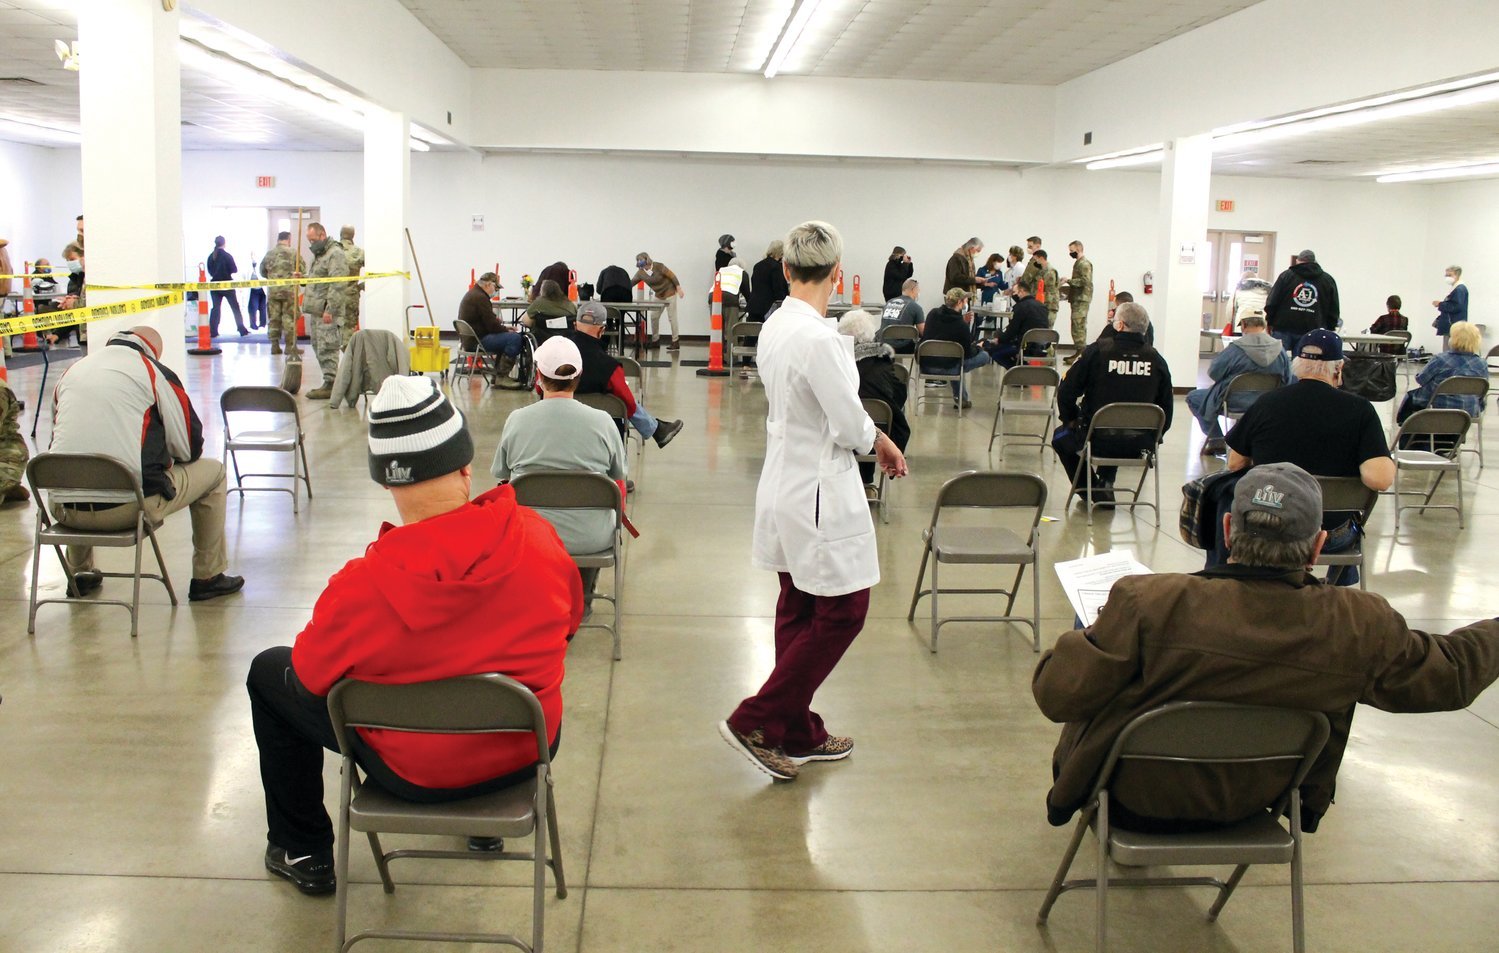 Sarah Wuellner, RN, of the Infection Control Department at Bothwell Regional Health Center, walks through the rows of seated citizens who are waiting in the observation area after receiving their vaccine Jan. 28 in the MO-Ag Theatre on the Missouri State Fairgrounds during a mass vaccination event. Everyone was required to wait 15 minutes before leaving.